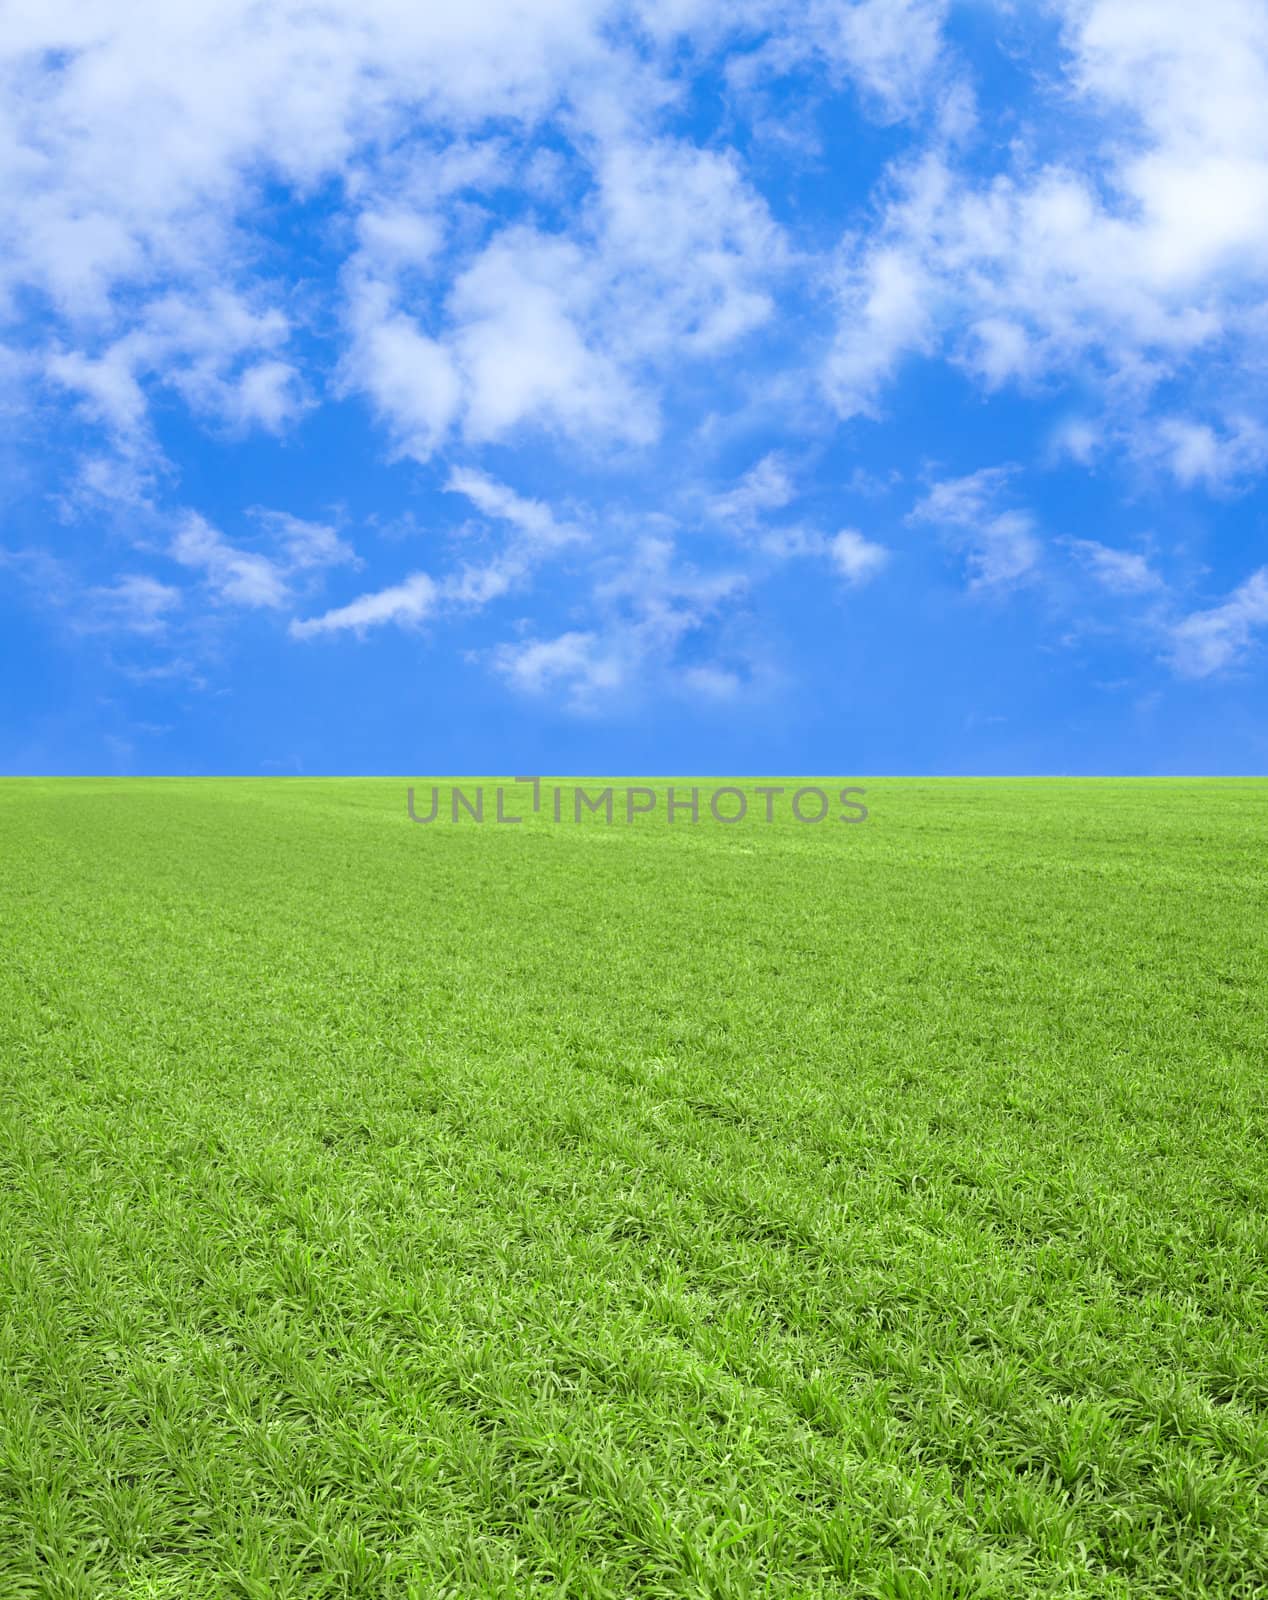 field of green grass and blue sky with clouds